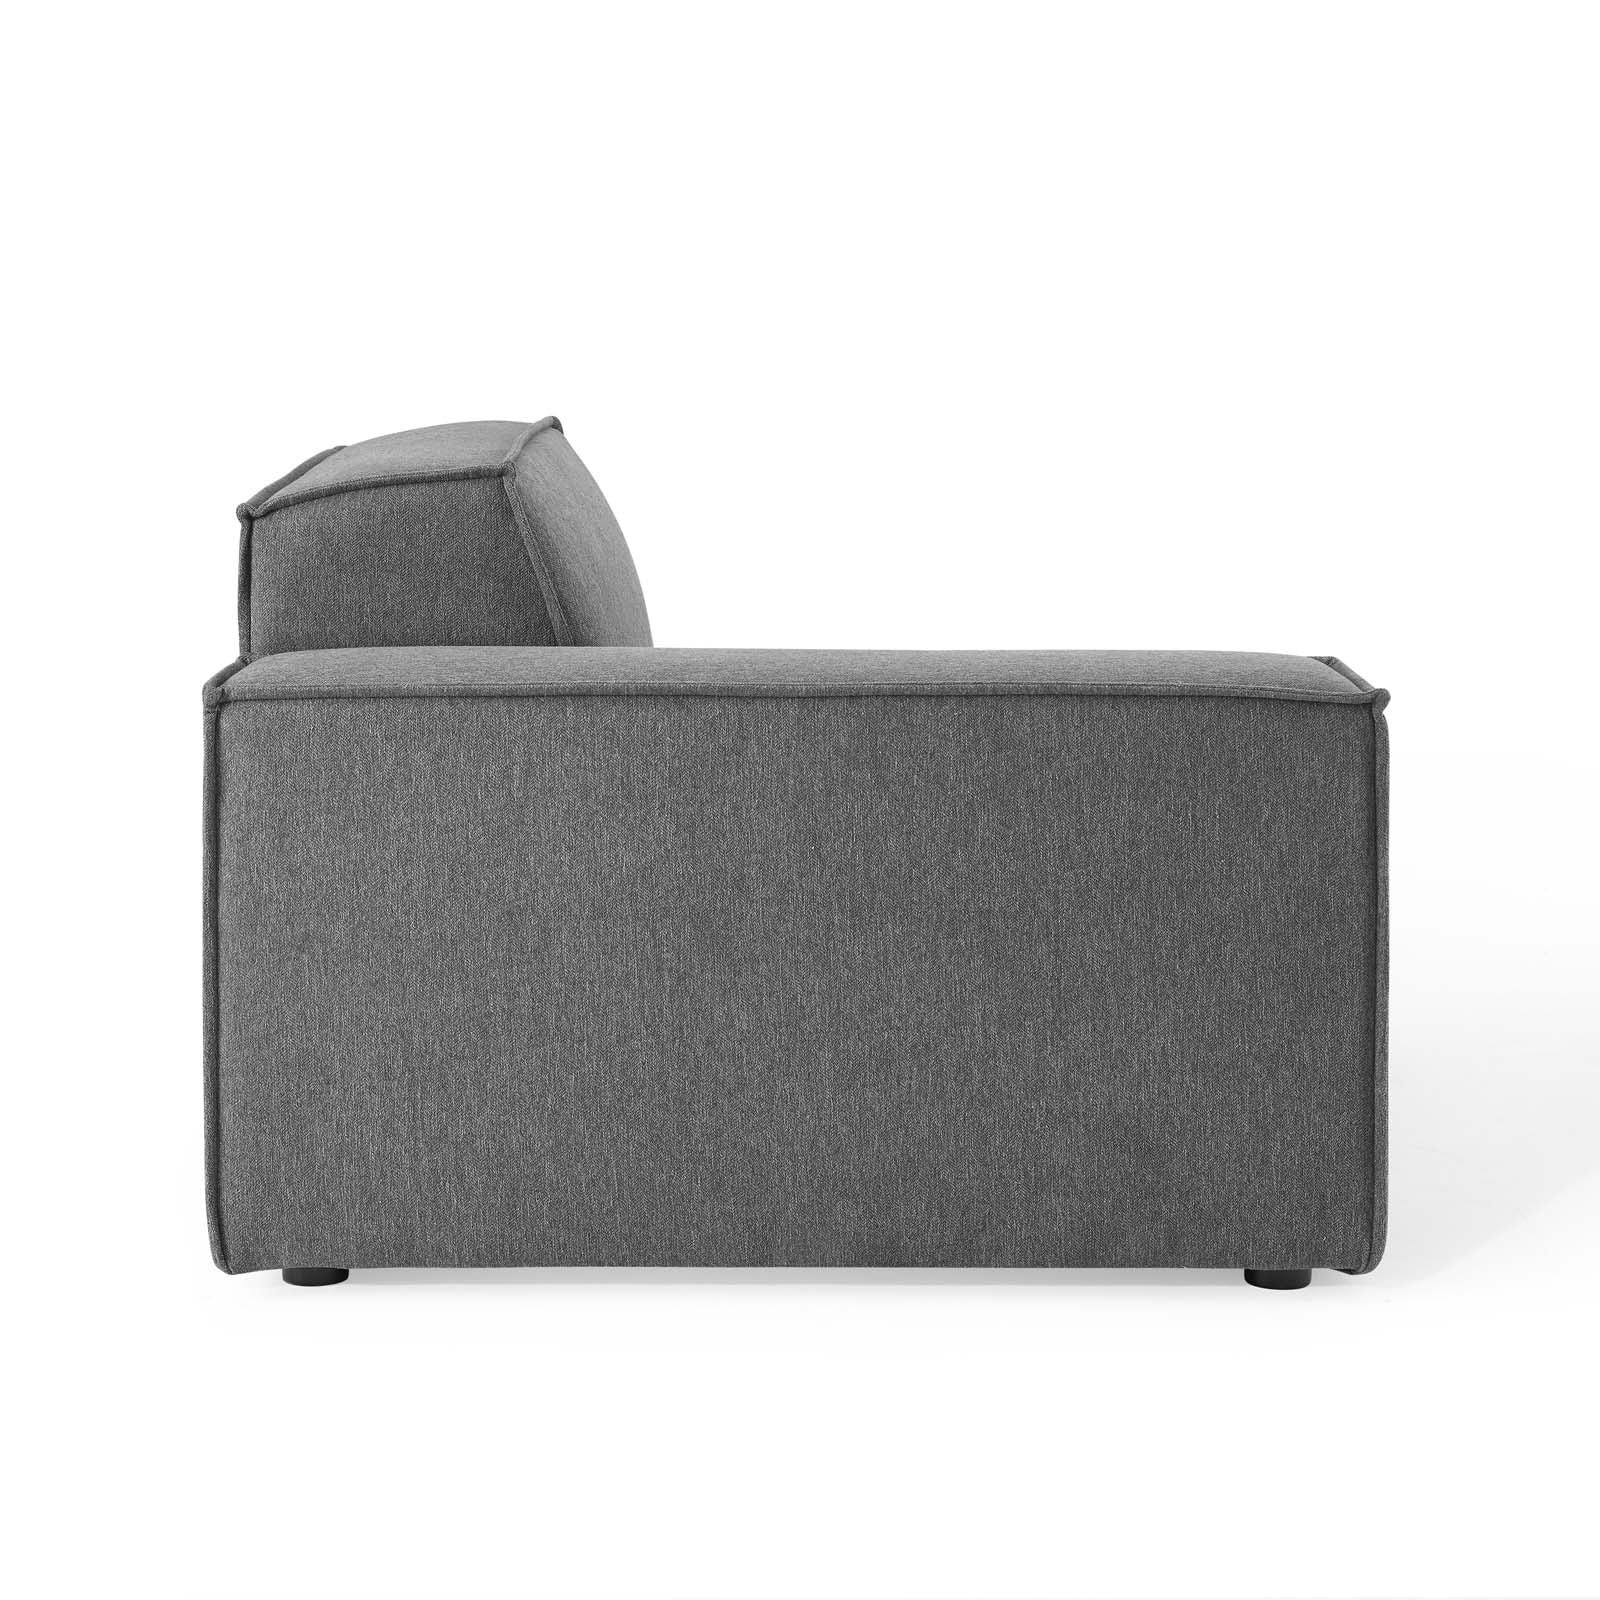 Modway Sofas & Couches - Restore 2-Piece Sofa Charcoal